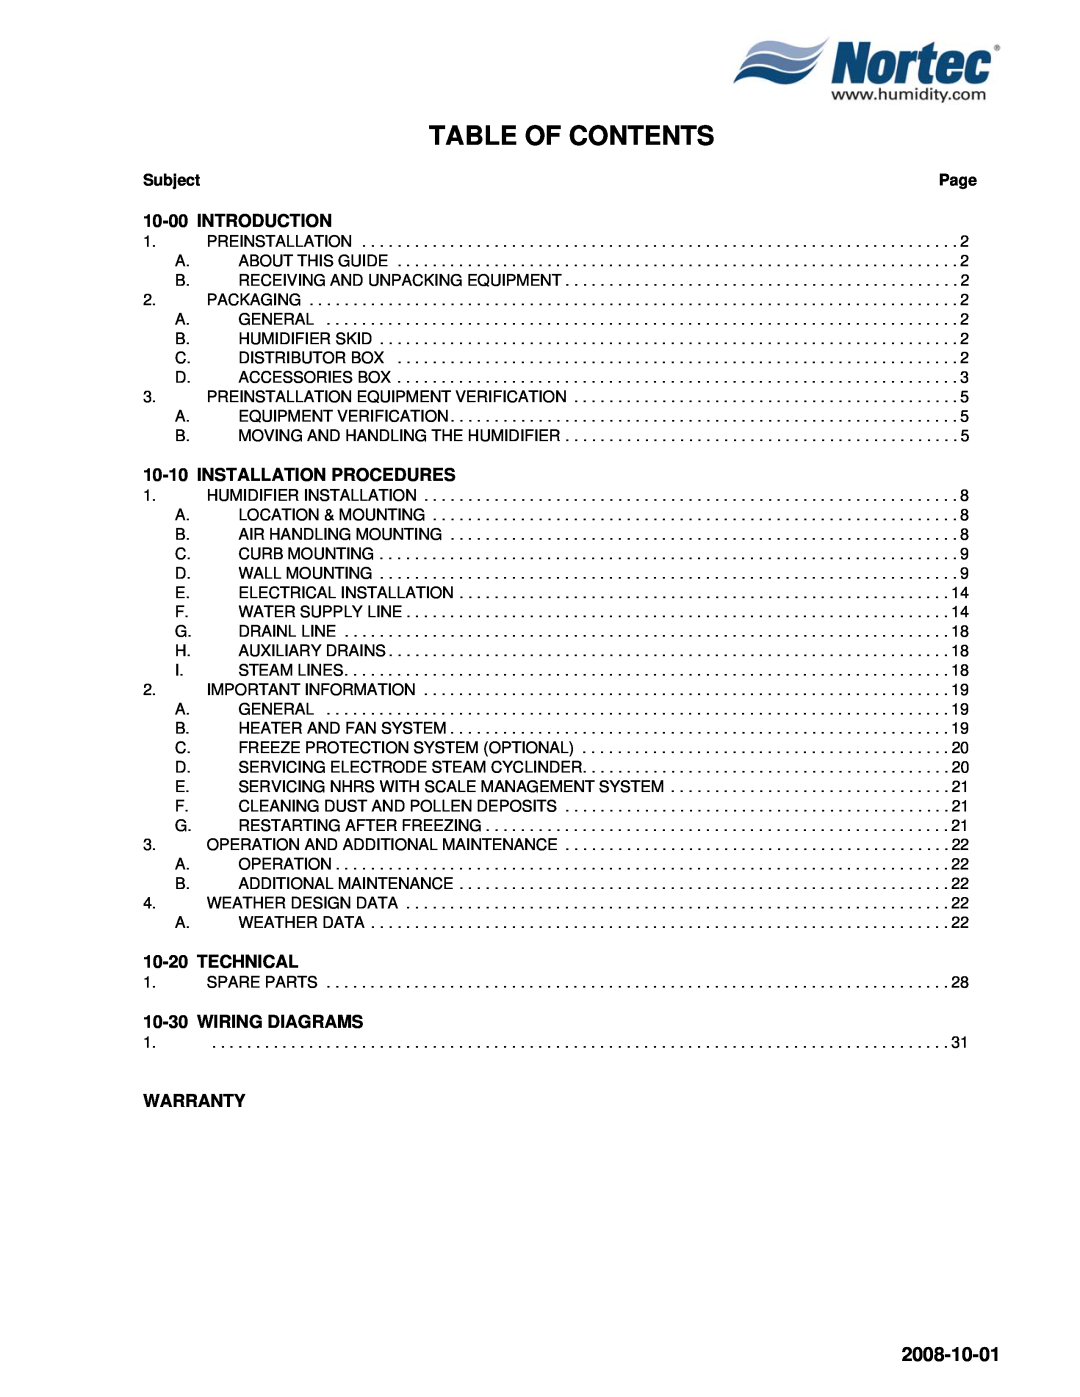 Nortec Industries NH Series Table Of Contents, 2008-10-01, 10-00INTRODUCTION, 10-10INSTALLATION PROCEDURES, 10-20TECHNICAL 